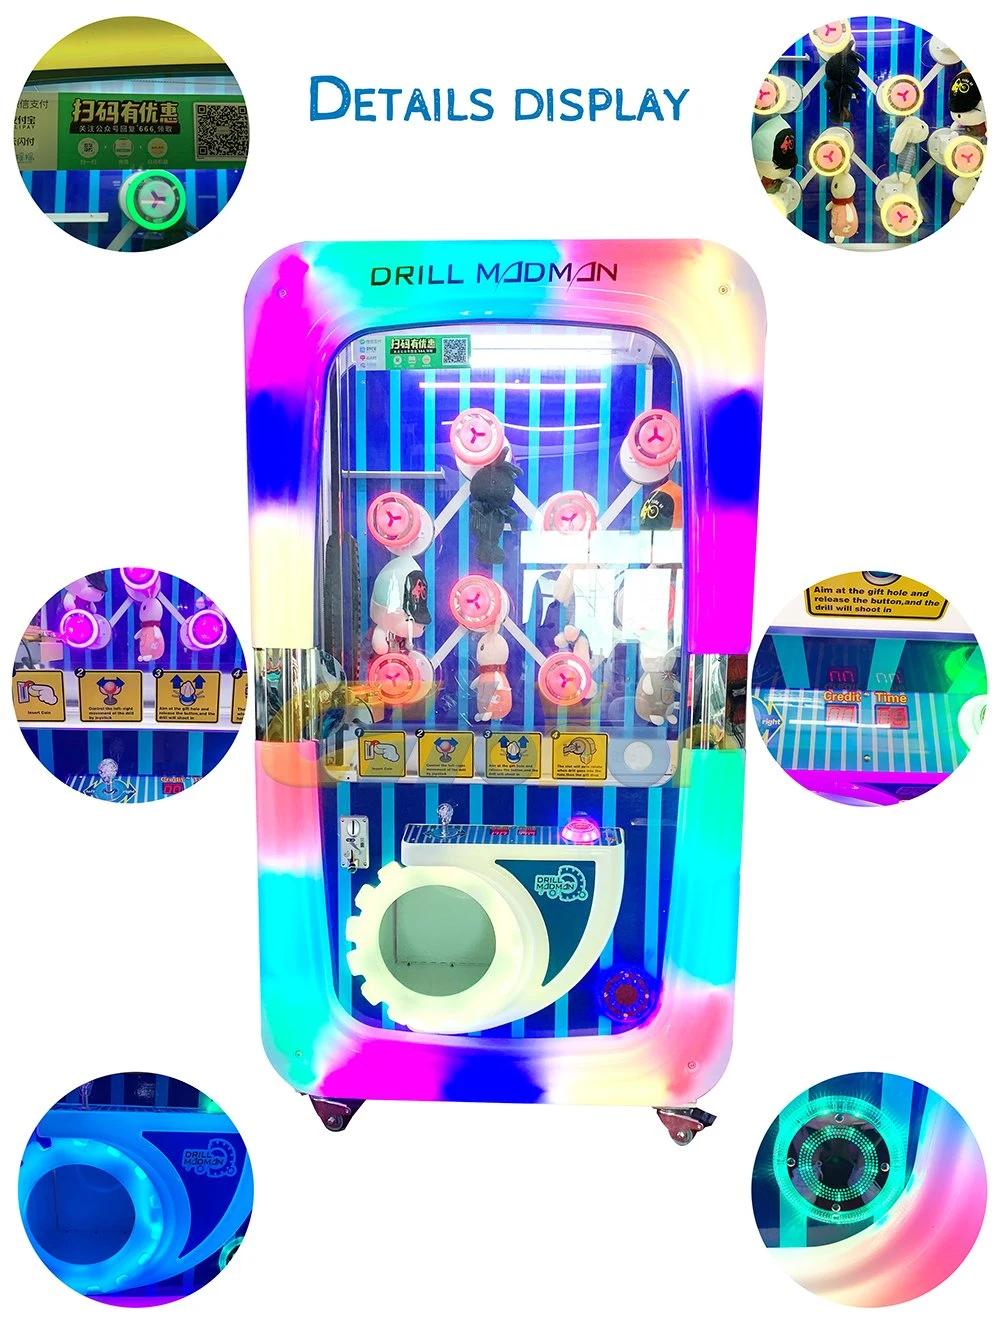 Drill Madman Arcade Toy Claw Machine Coin Pusher Gift Vending Game Electronic Plush Toy Vending Game Console Arcade Prize Vending Game Machine